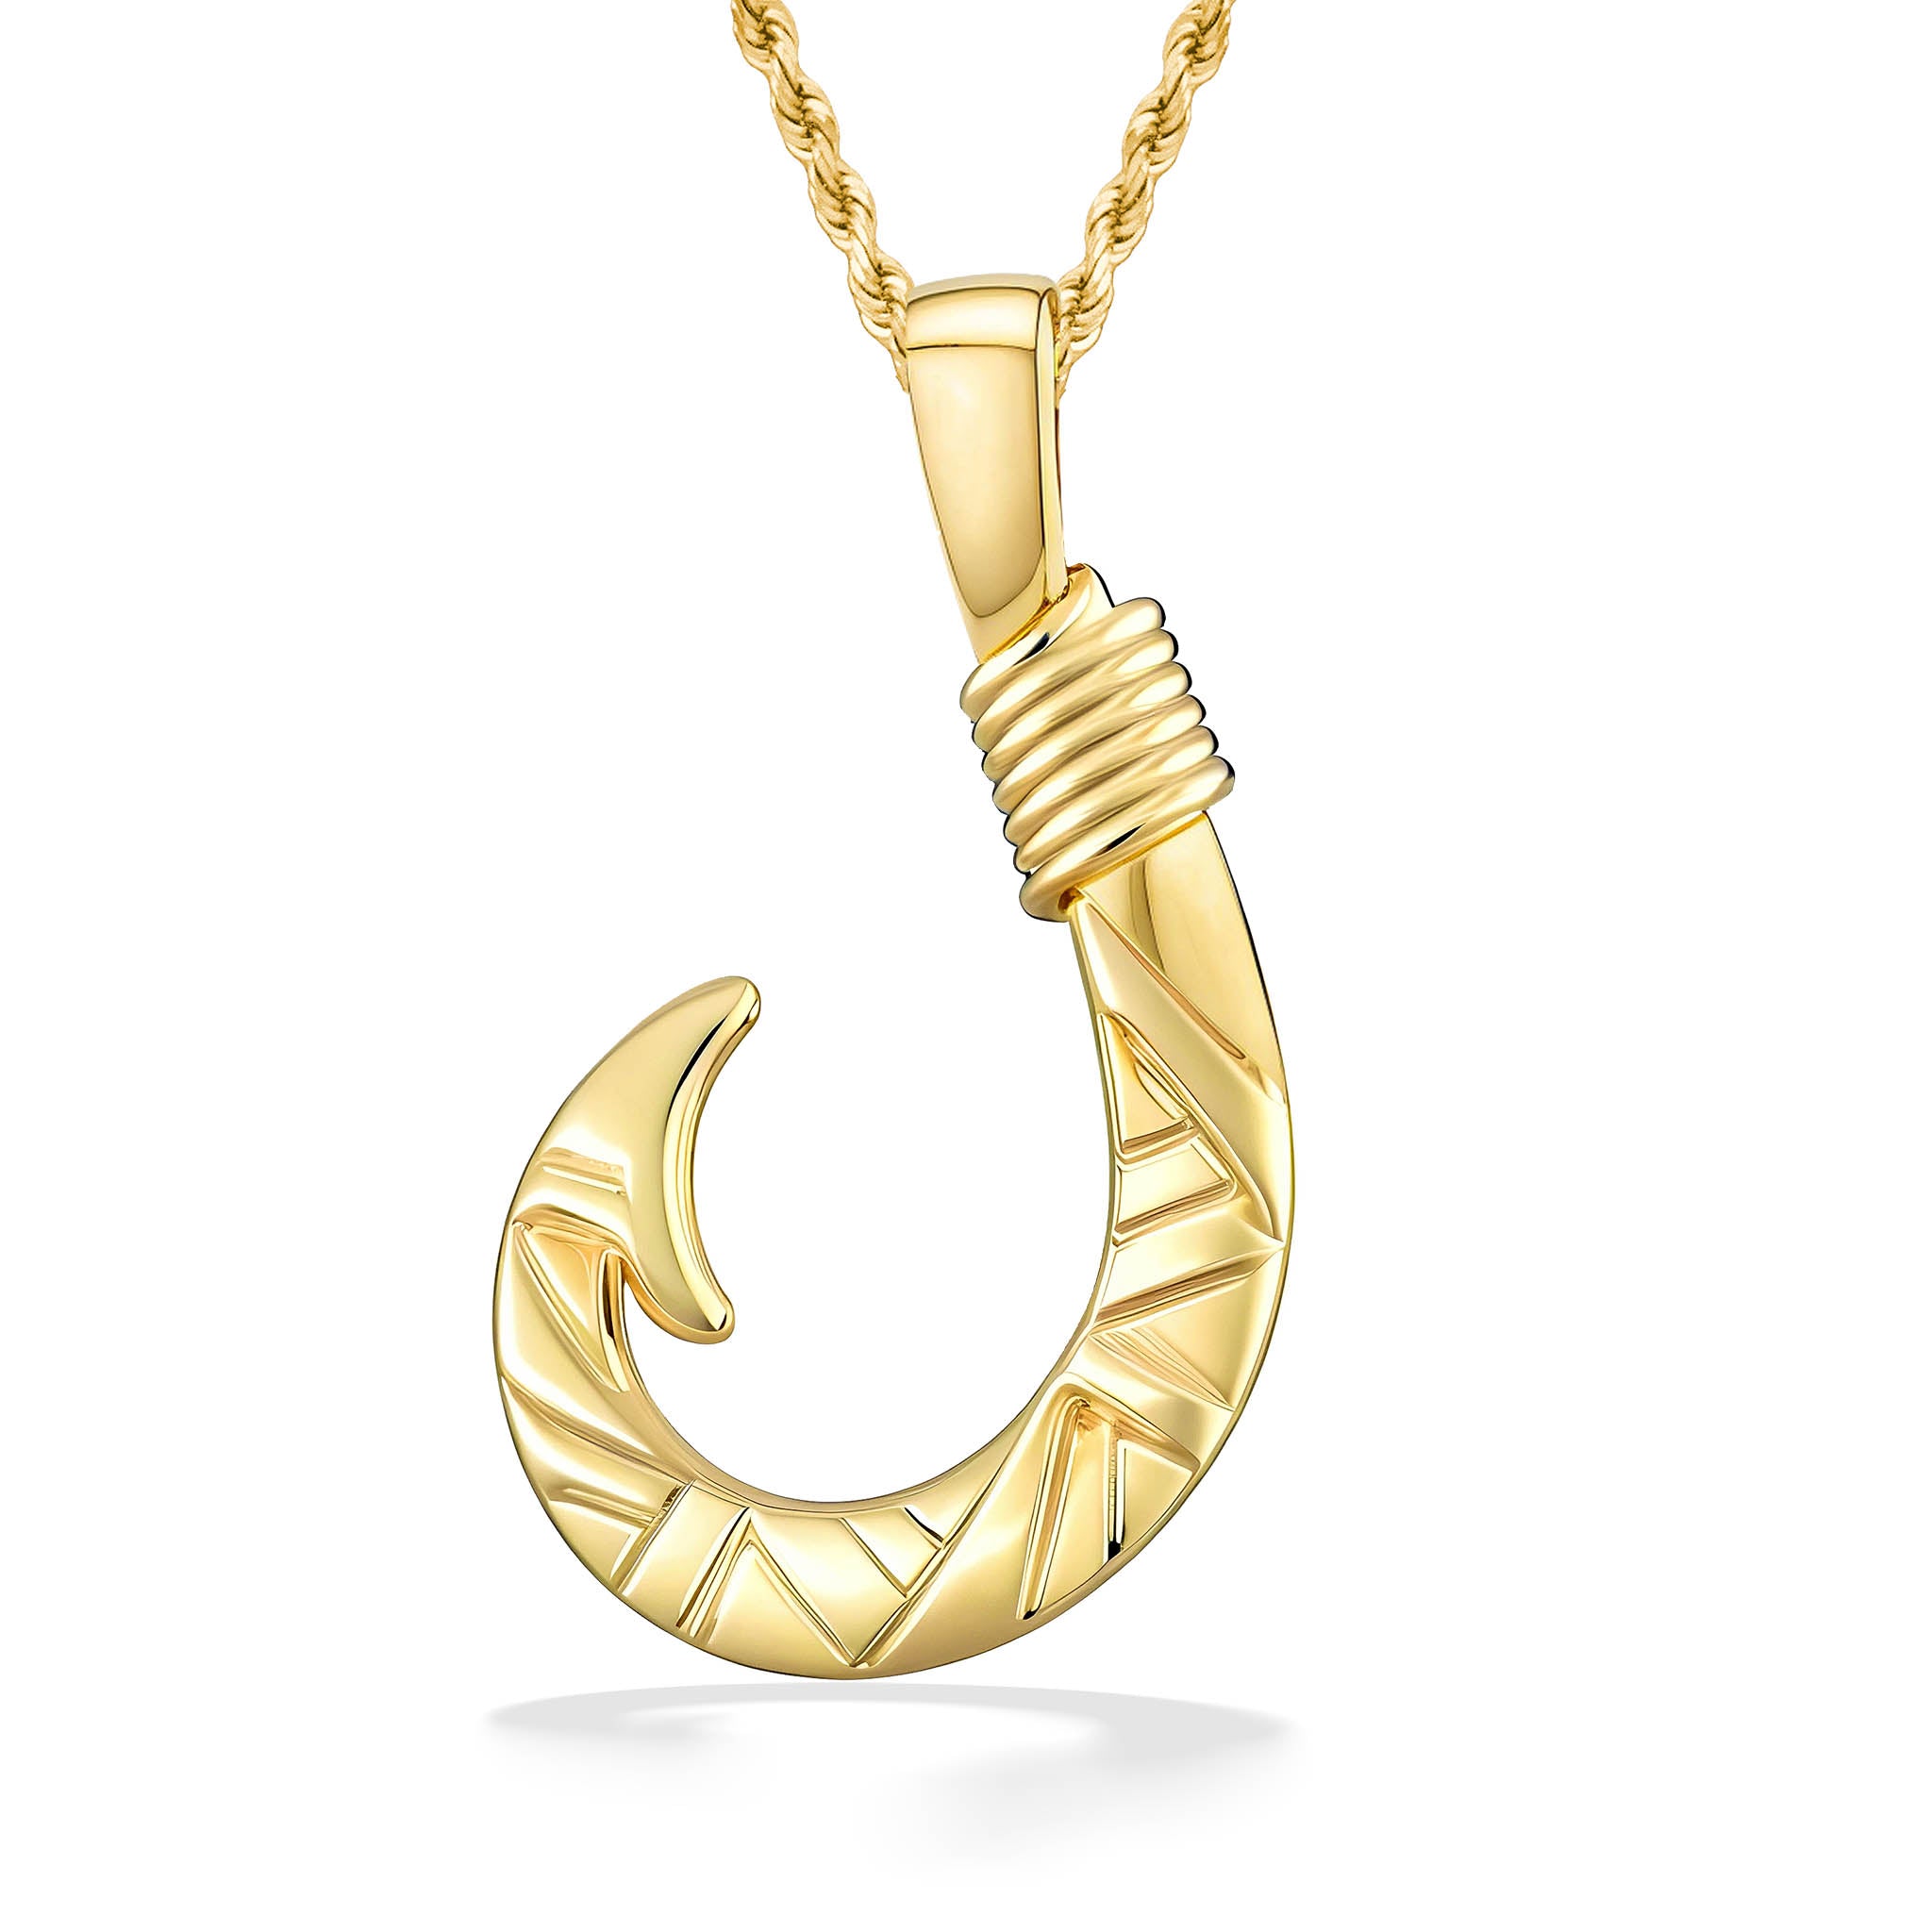 Lā'au Koa Fish Hook Pendant with Gold Plated Stainless Steel Link Chain 24 inch Chain / Curb (links All The Same Size) Includes Fish Hook